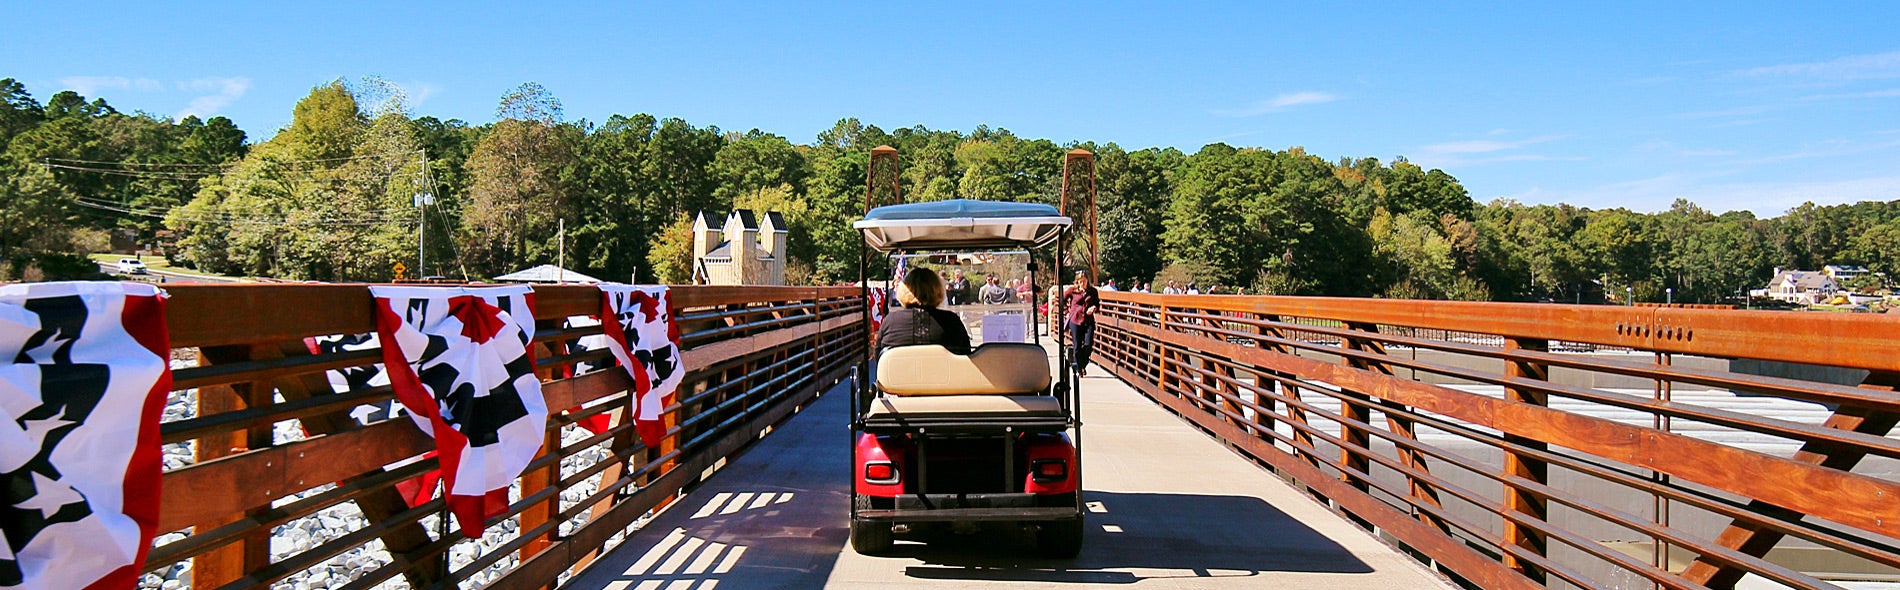 No, Georgia, Golf Carts Are not the Green Transportation of the Future